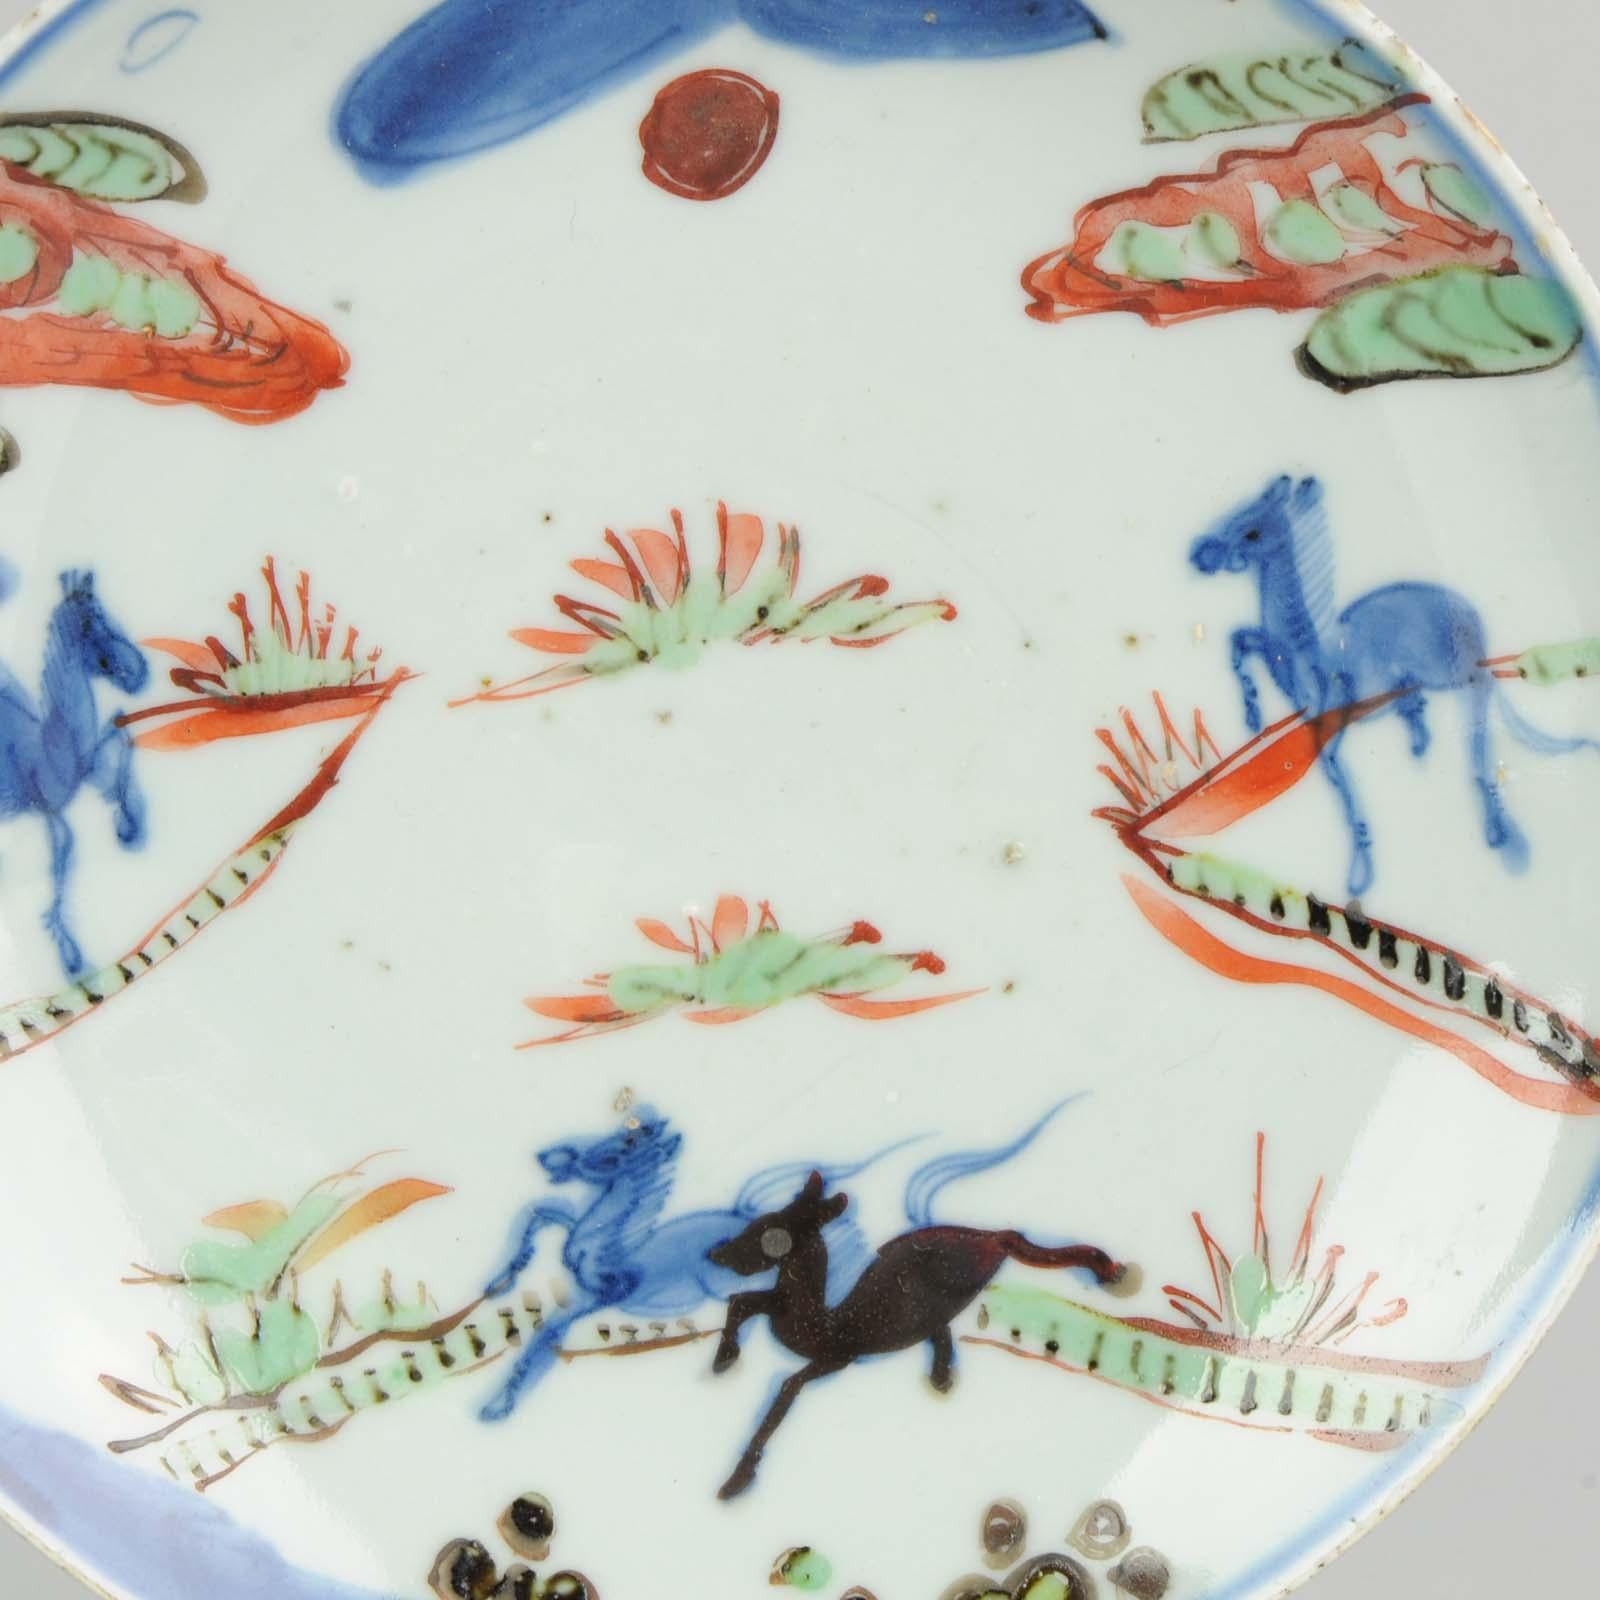 A very nicely decorated plate. A late Ming Ko-Akae porcelain dish, Tianqi or Chongzhen period 1621-1644.
Painted with horses, underglaze blue and over glaze enamels, 17th century

With Tomobako included.

Moon
The moon is chiefly associated